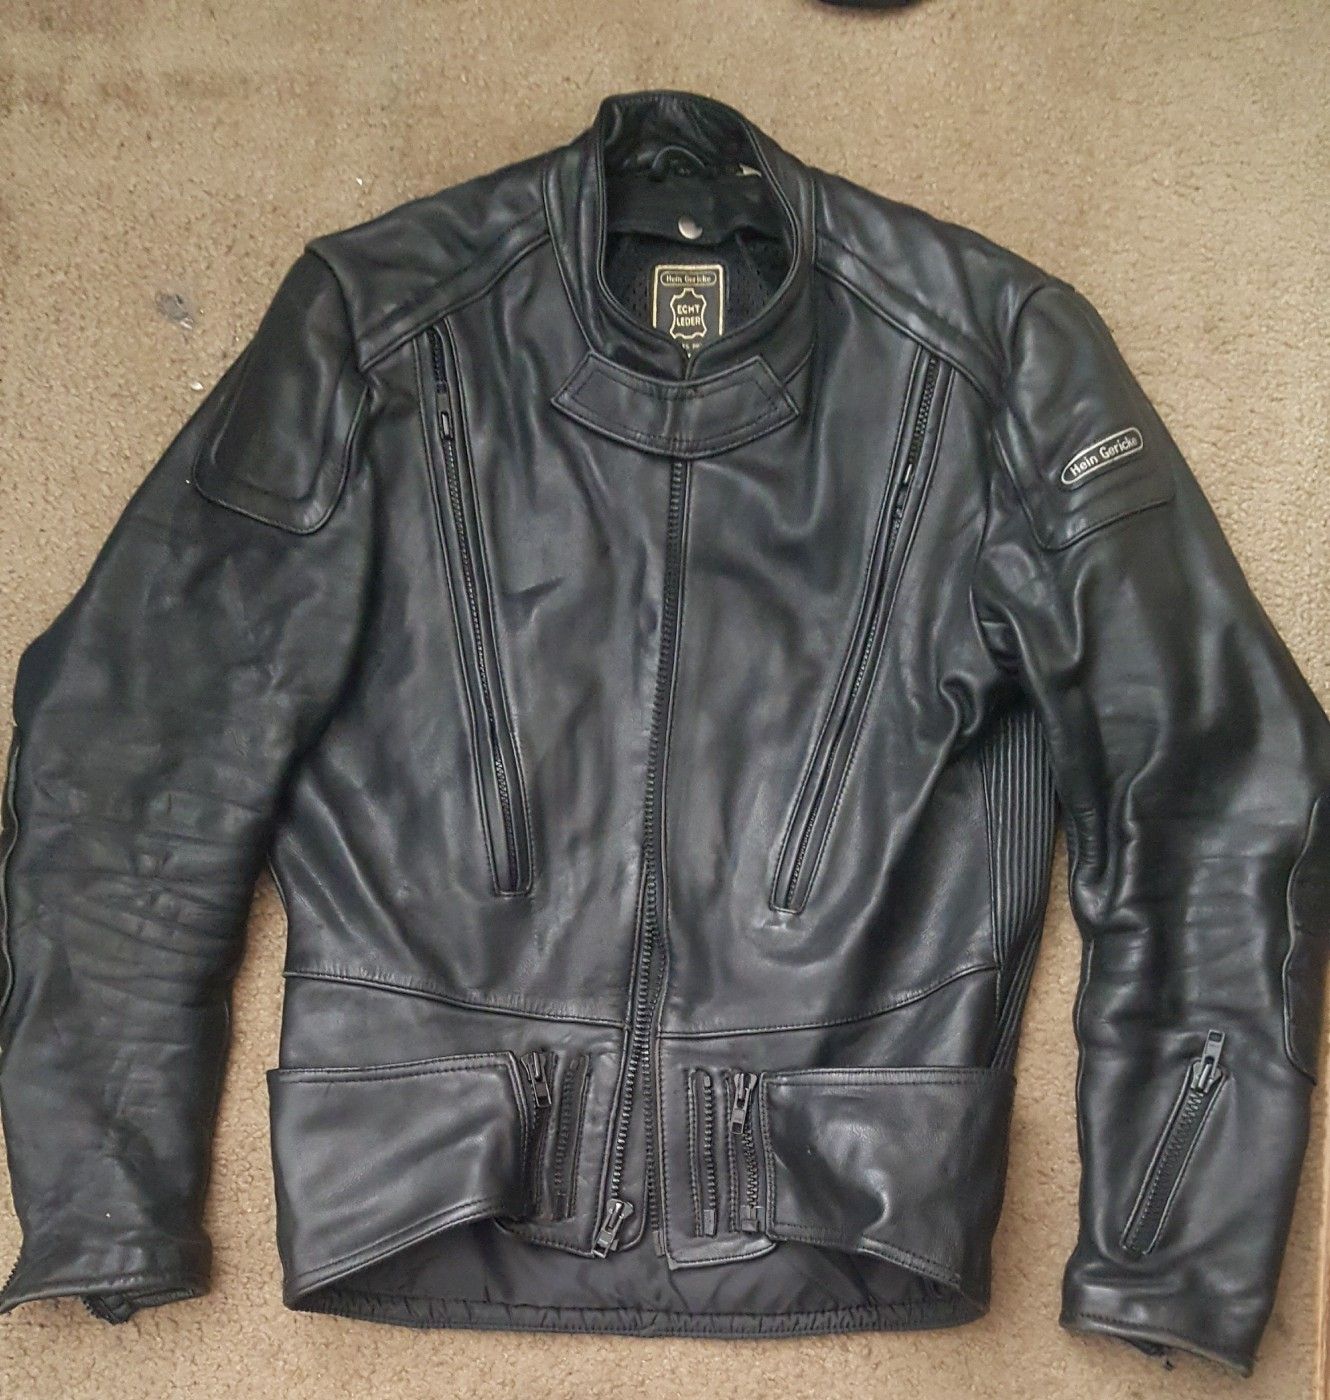 Motorcycle Jacket Hein Gericke size 42 vented leather jacket Size Small , Price Drop to $60 